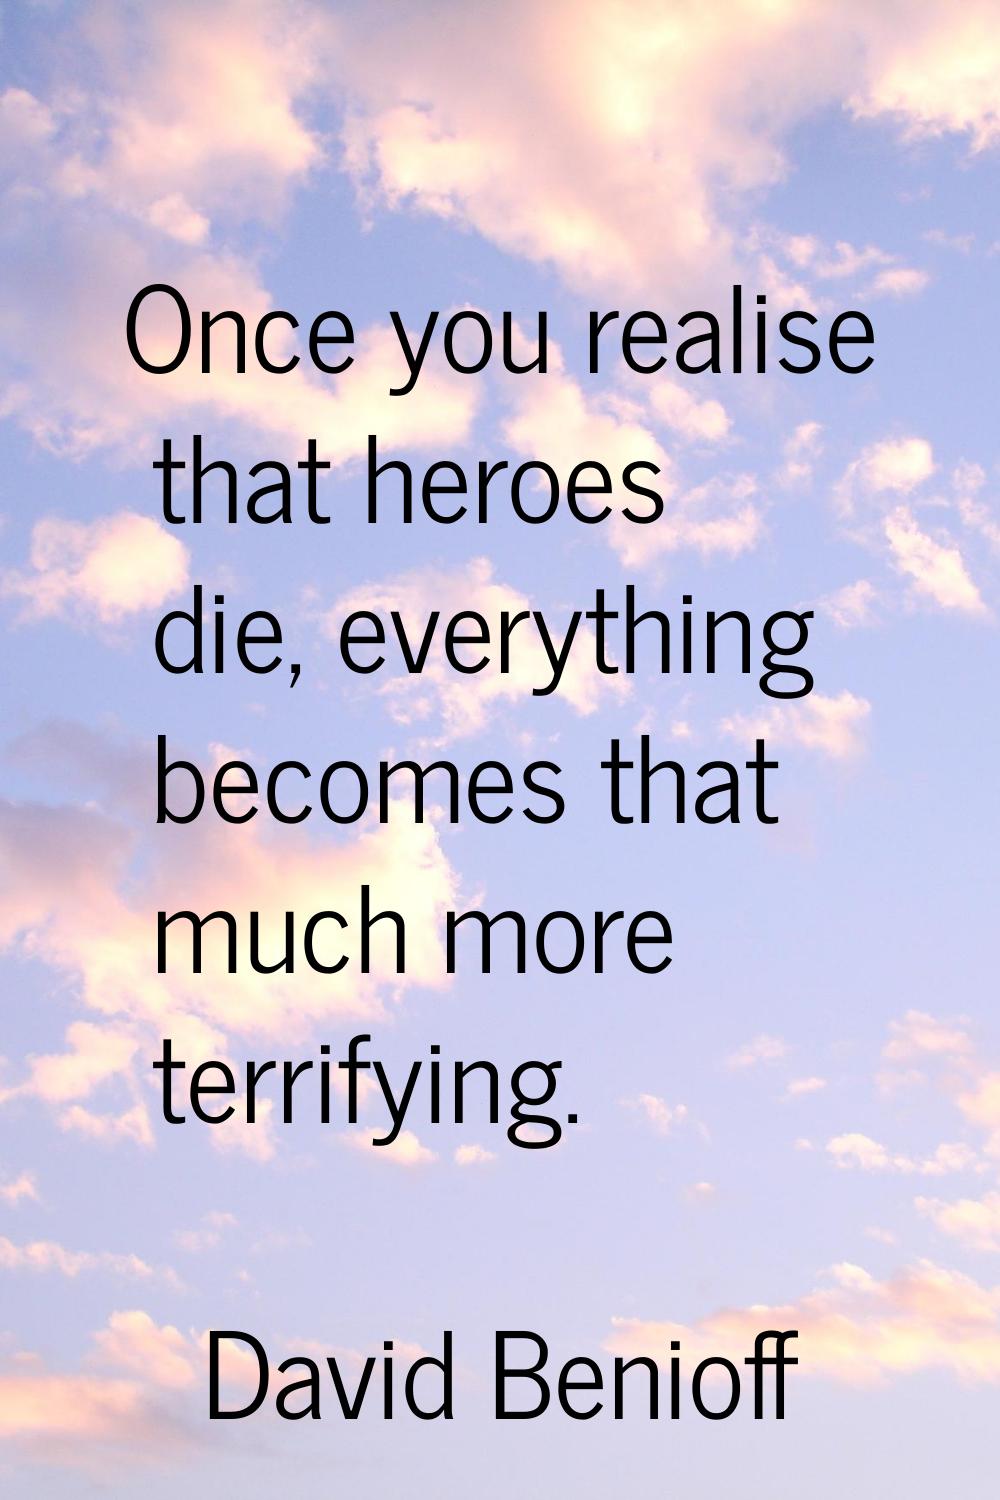 Once you realise that heroes die, everything becomes that much more terrifying.